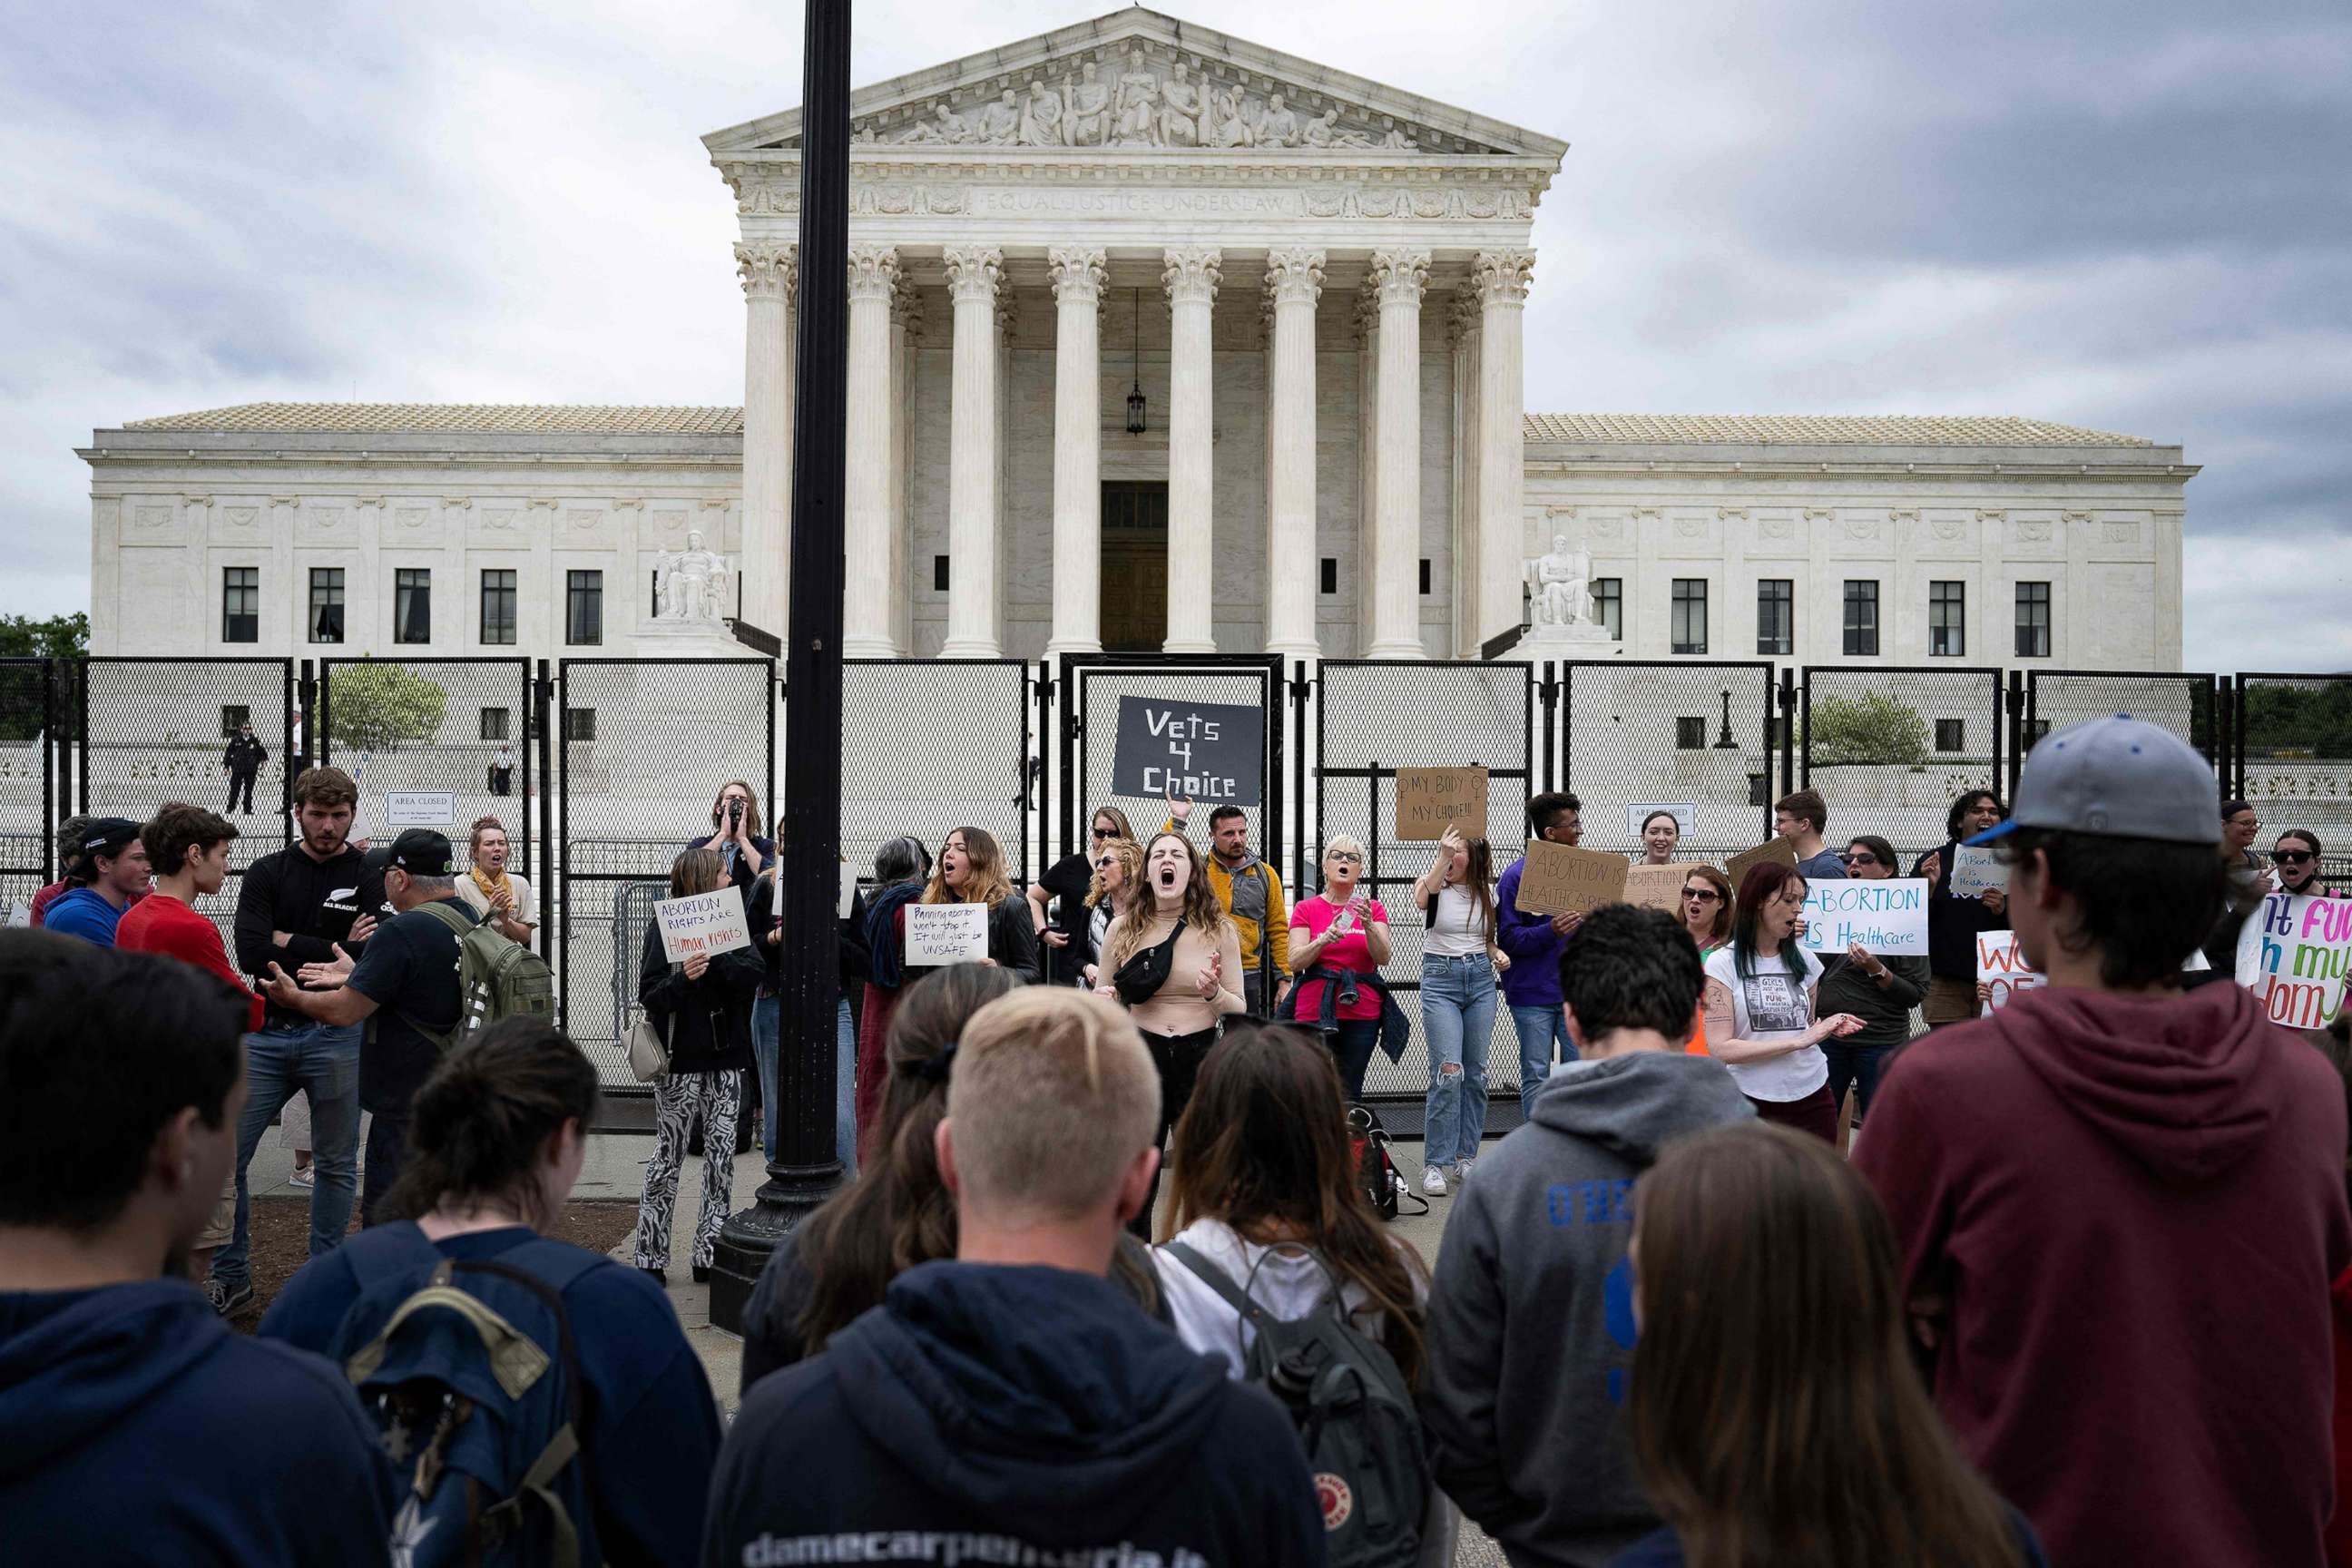 PHOTO: A line of pro-life demonstrators watch as Pro-choice demonstrators chant in front of an un-scalable fence that stands around the US Supreme Court in Washington, D.C., on May 5, 2022.